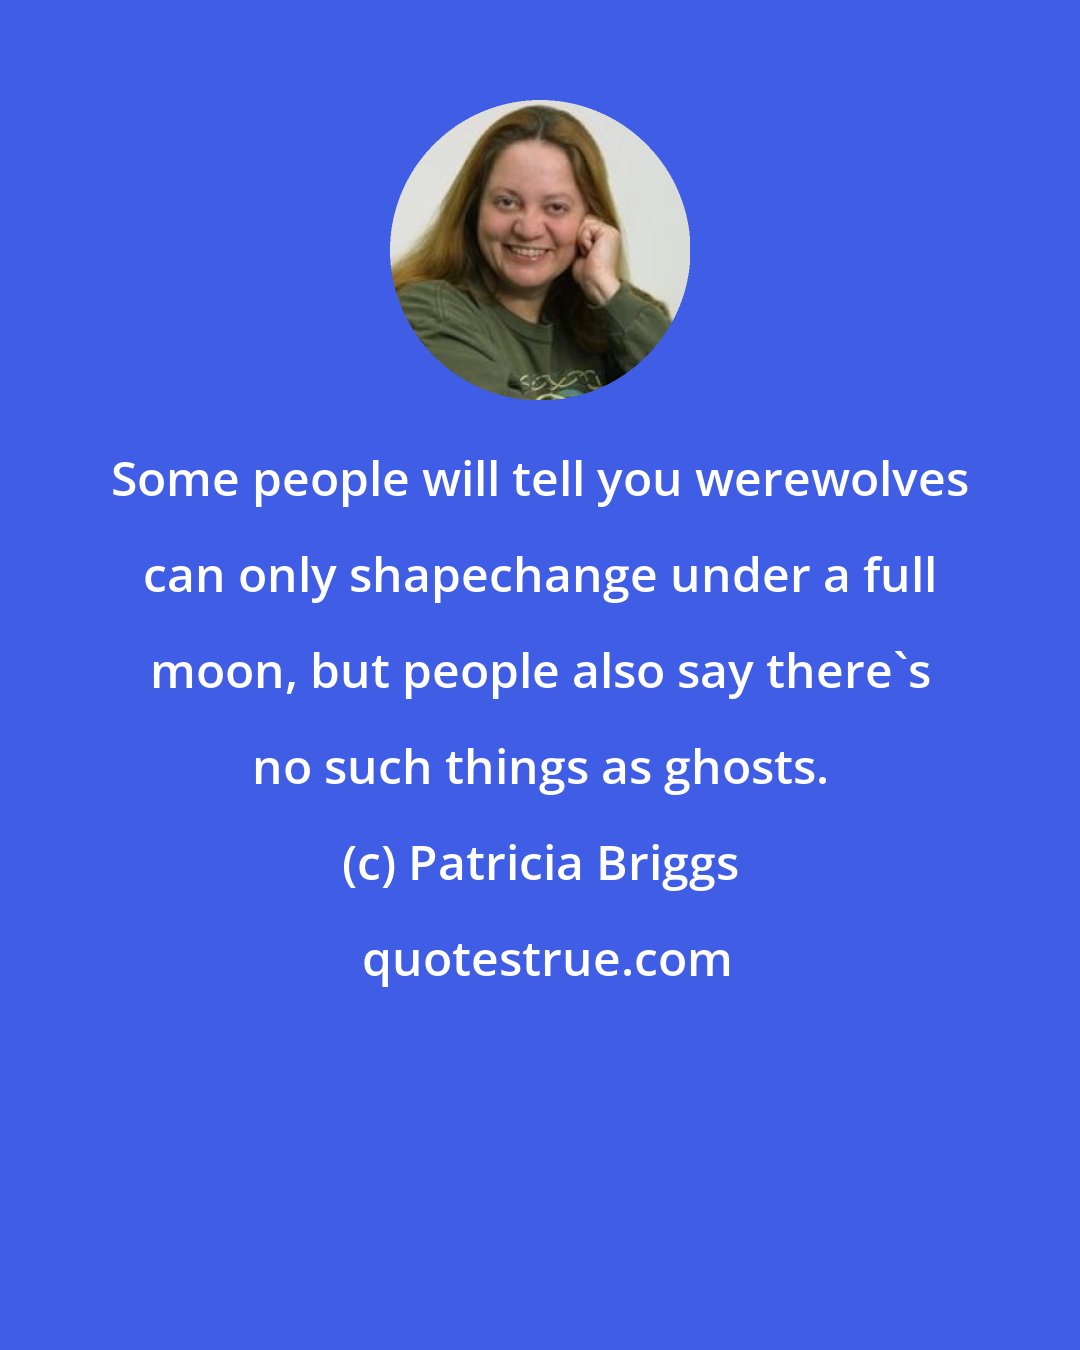 Patricia Briggs: Some people will tell you werewolves can only shapechange under a full moon, but people also say there's no such things as ghosts.